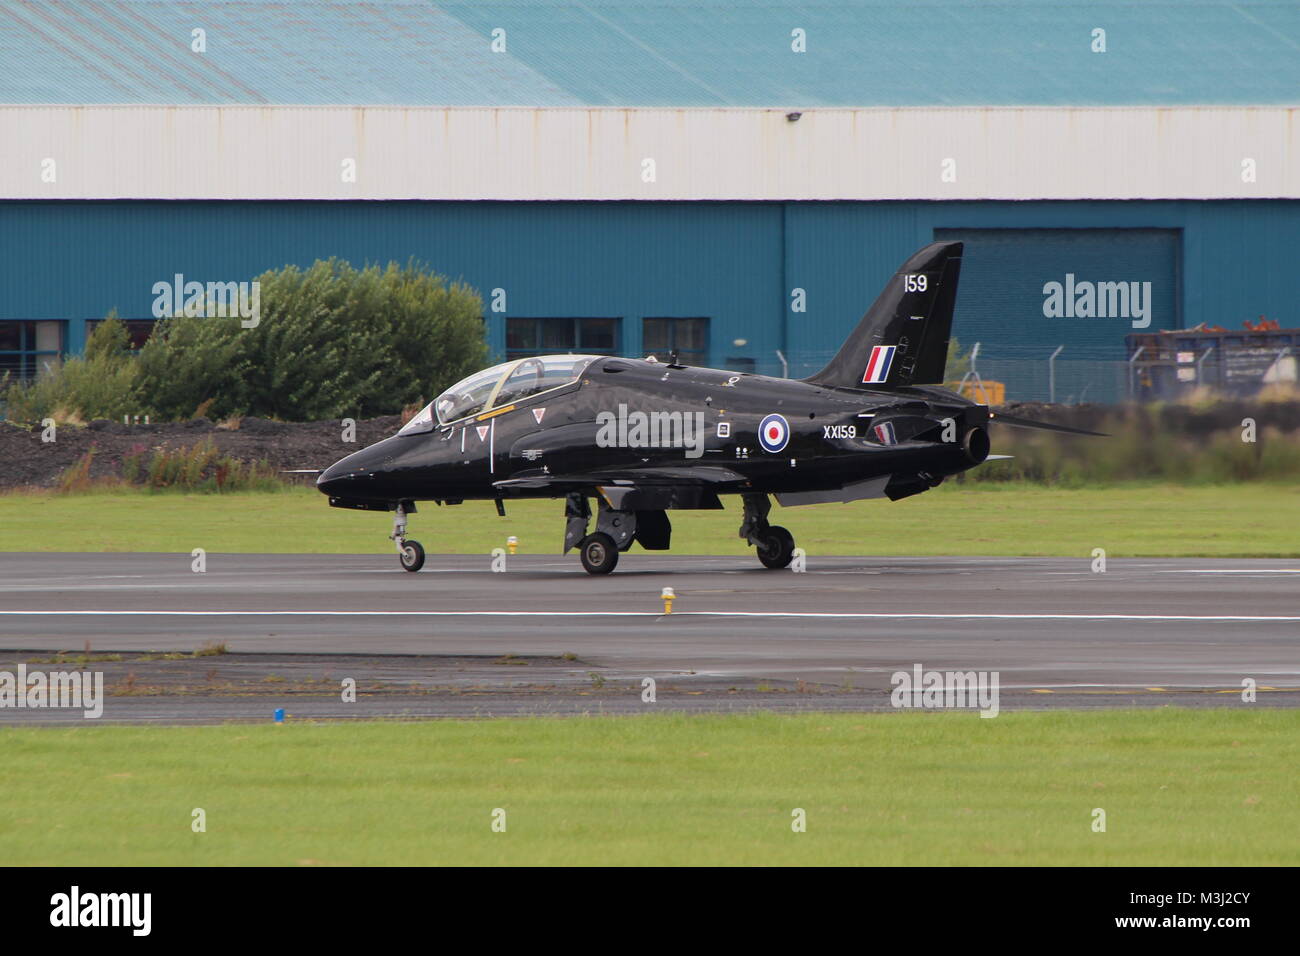 XX159, a BAe Hawk T1A operated by the Royal Navy, at Prestwick Airport during Exercise Saxon Warrior 2017. Stock Photo